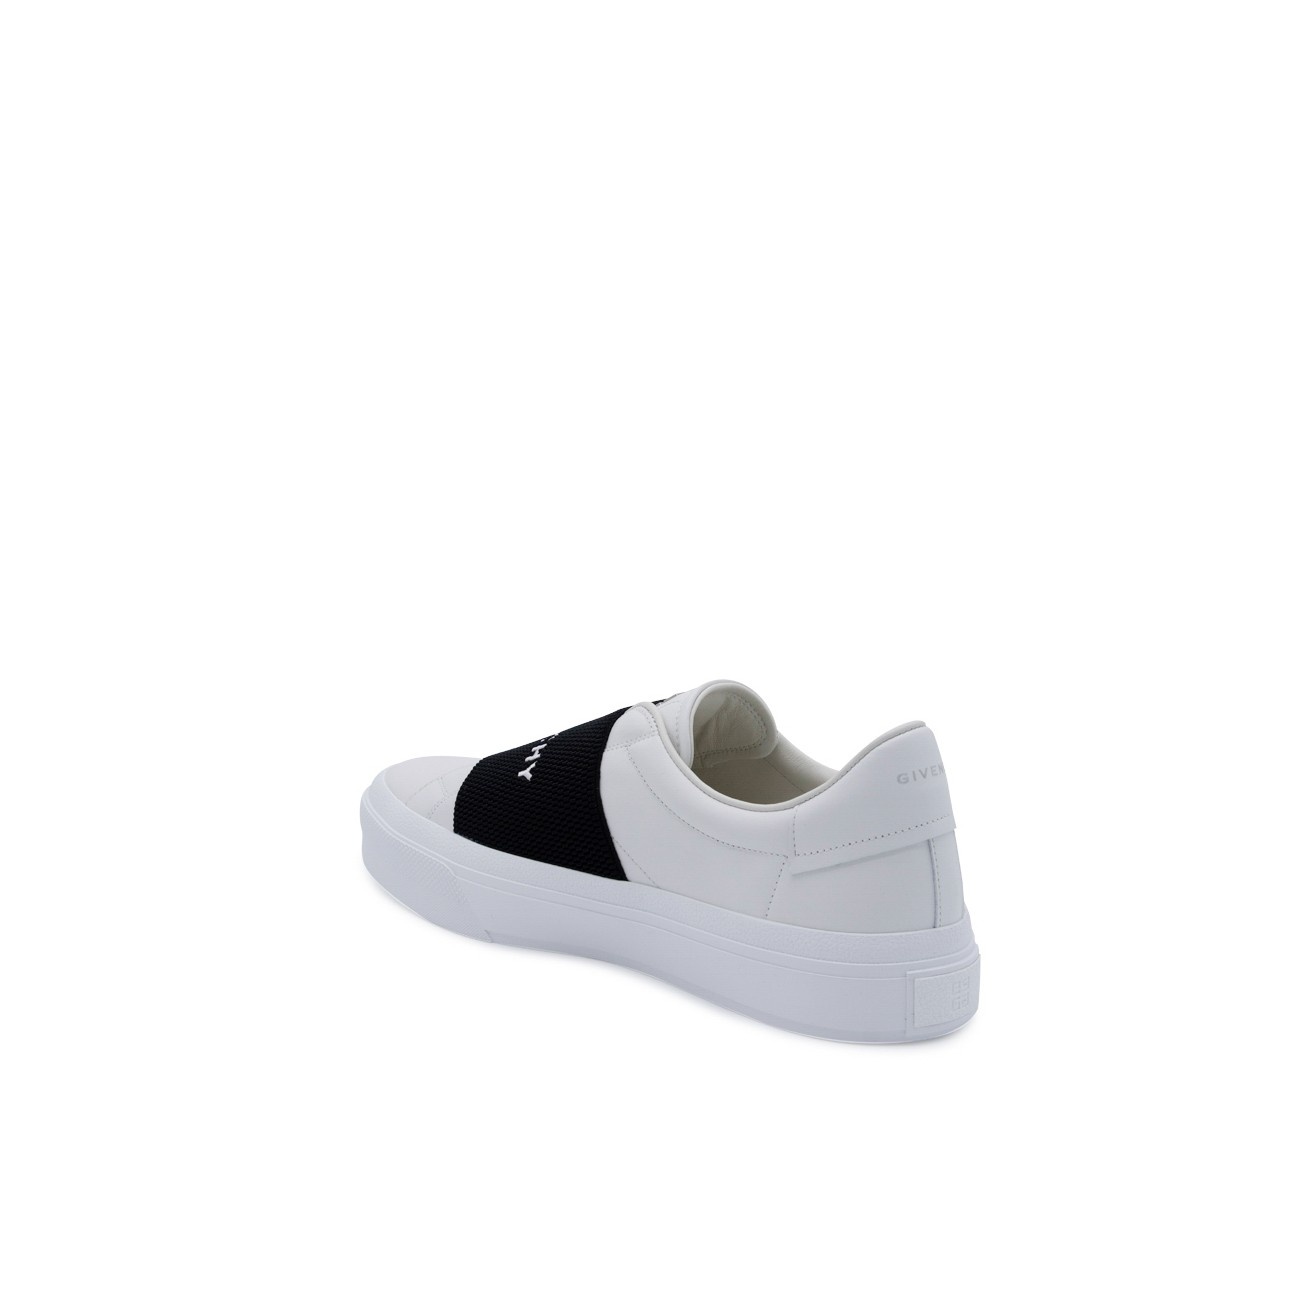 white and black leather city sneakers - 3